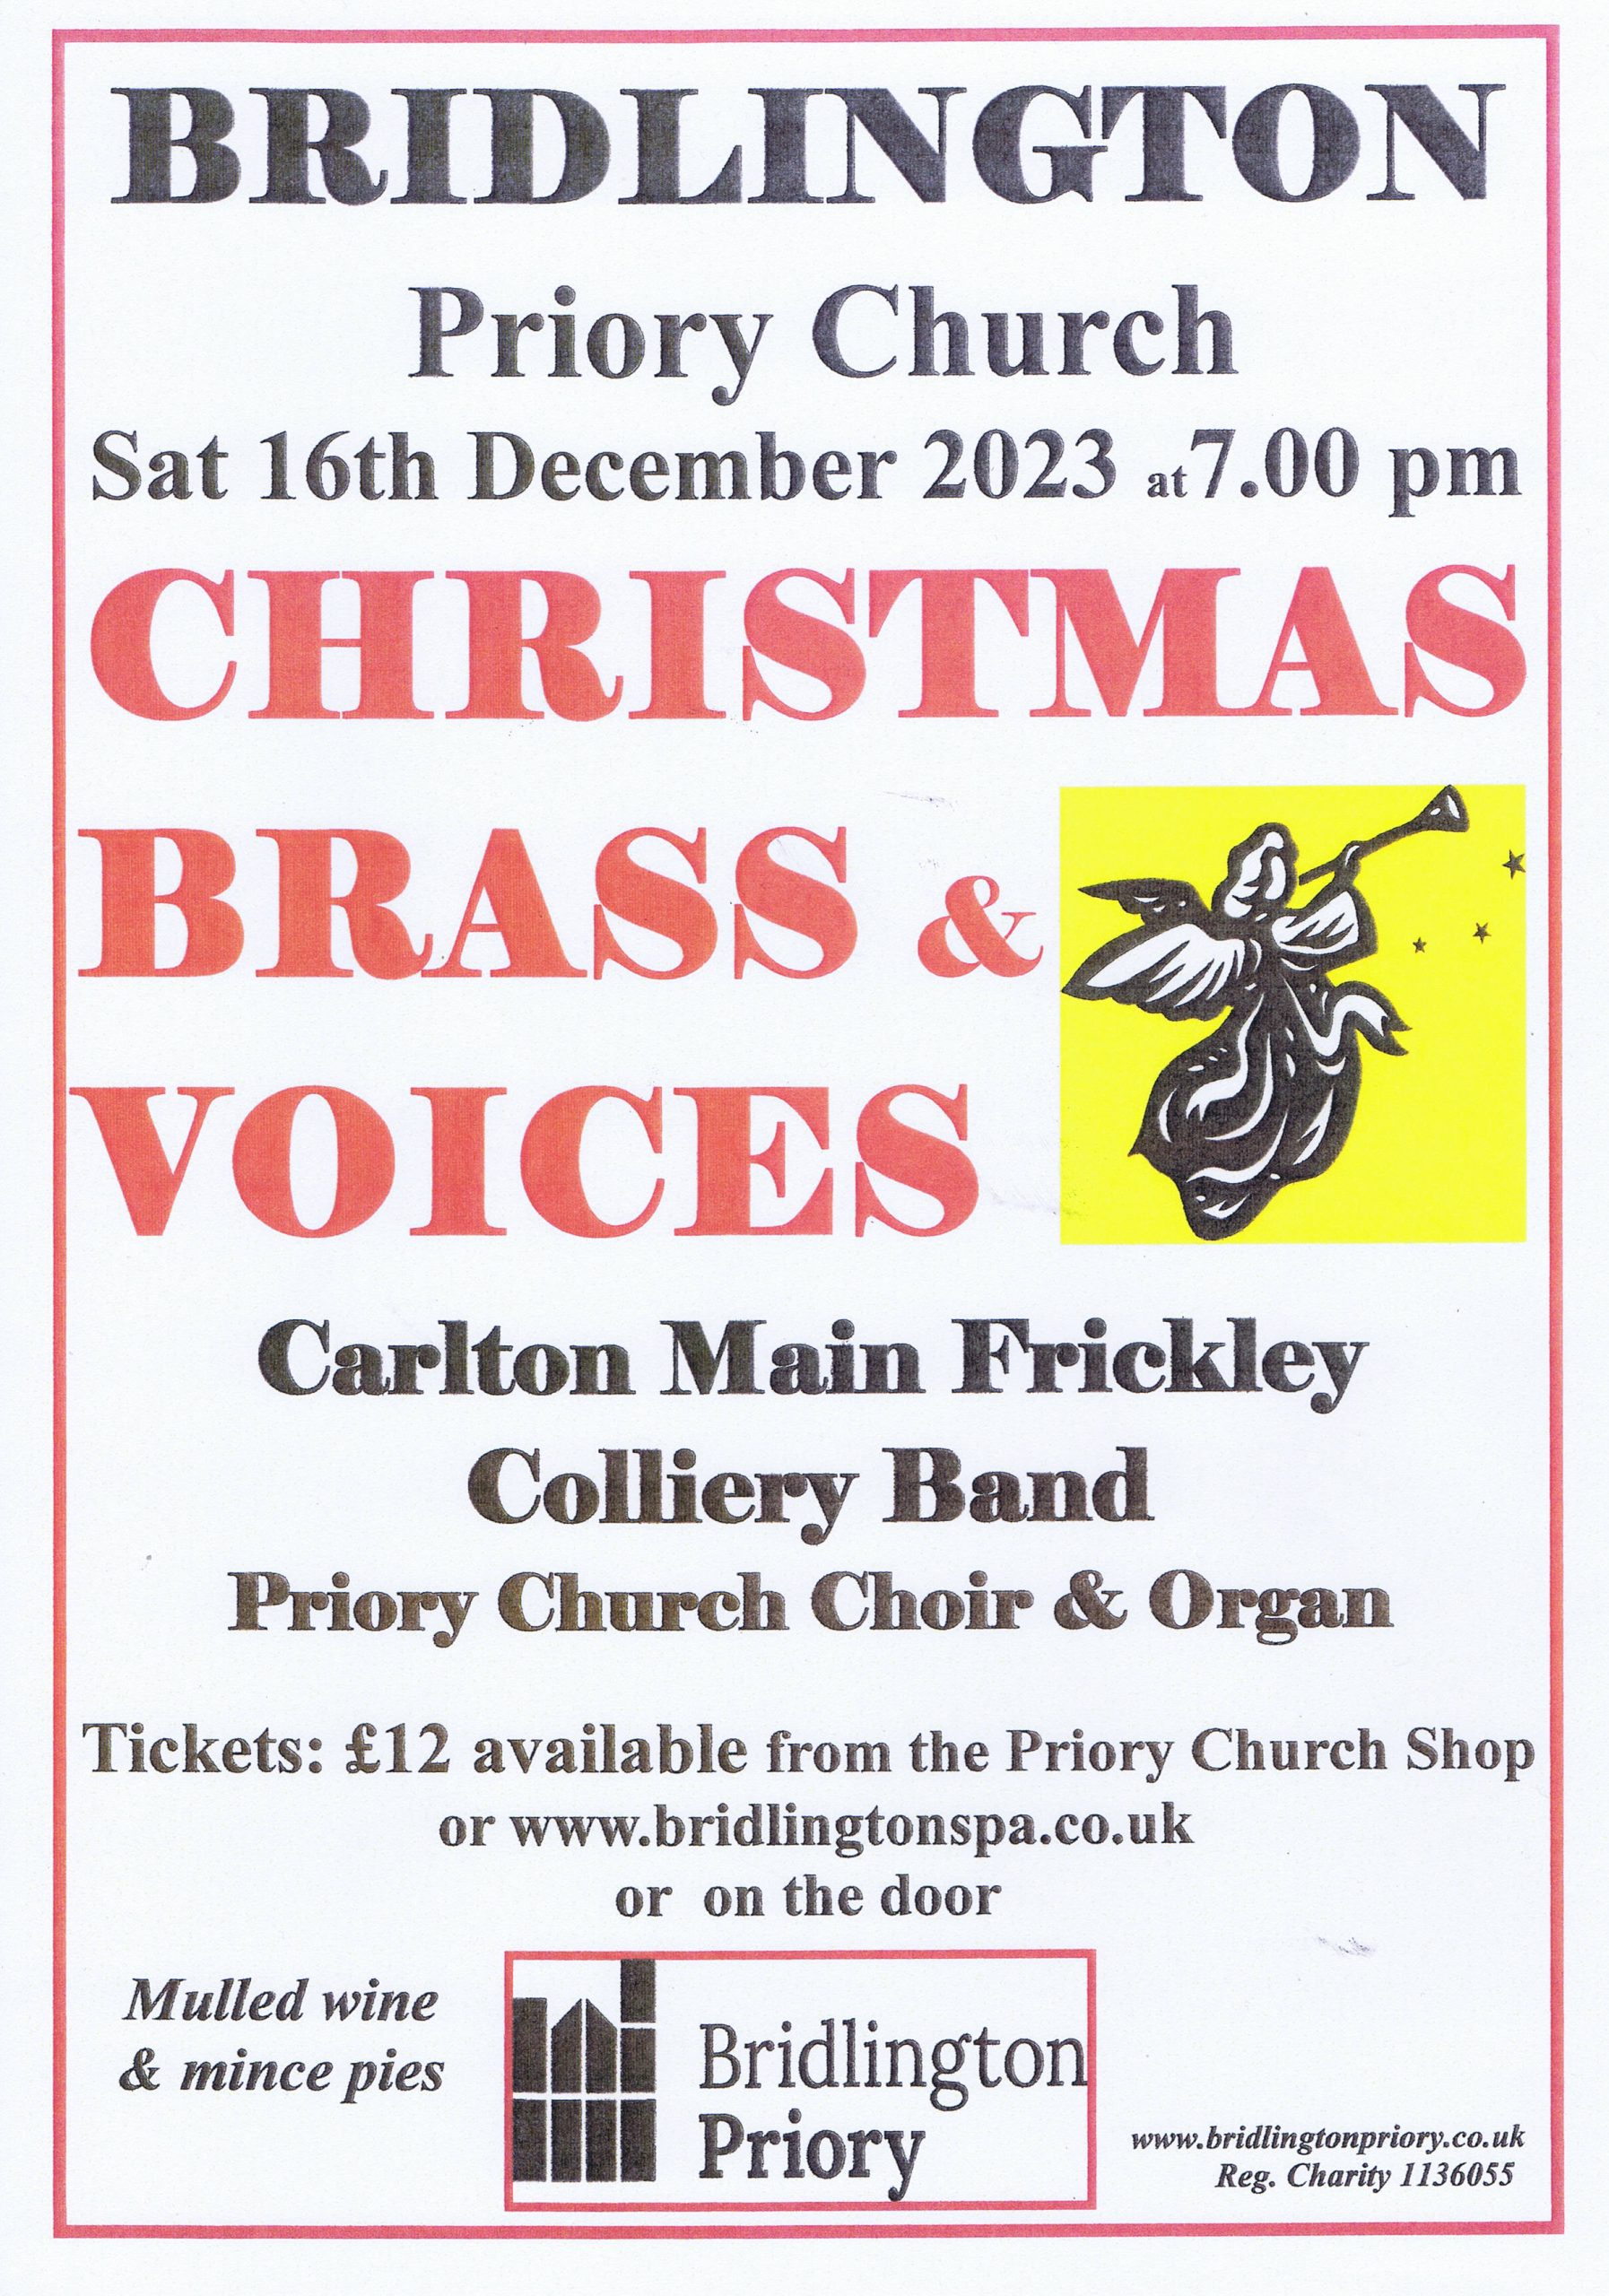 Poster - Christmas Brass & Voices 2023 at Bridlington Priory